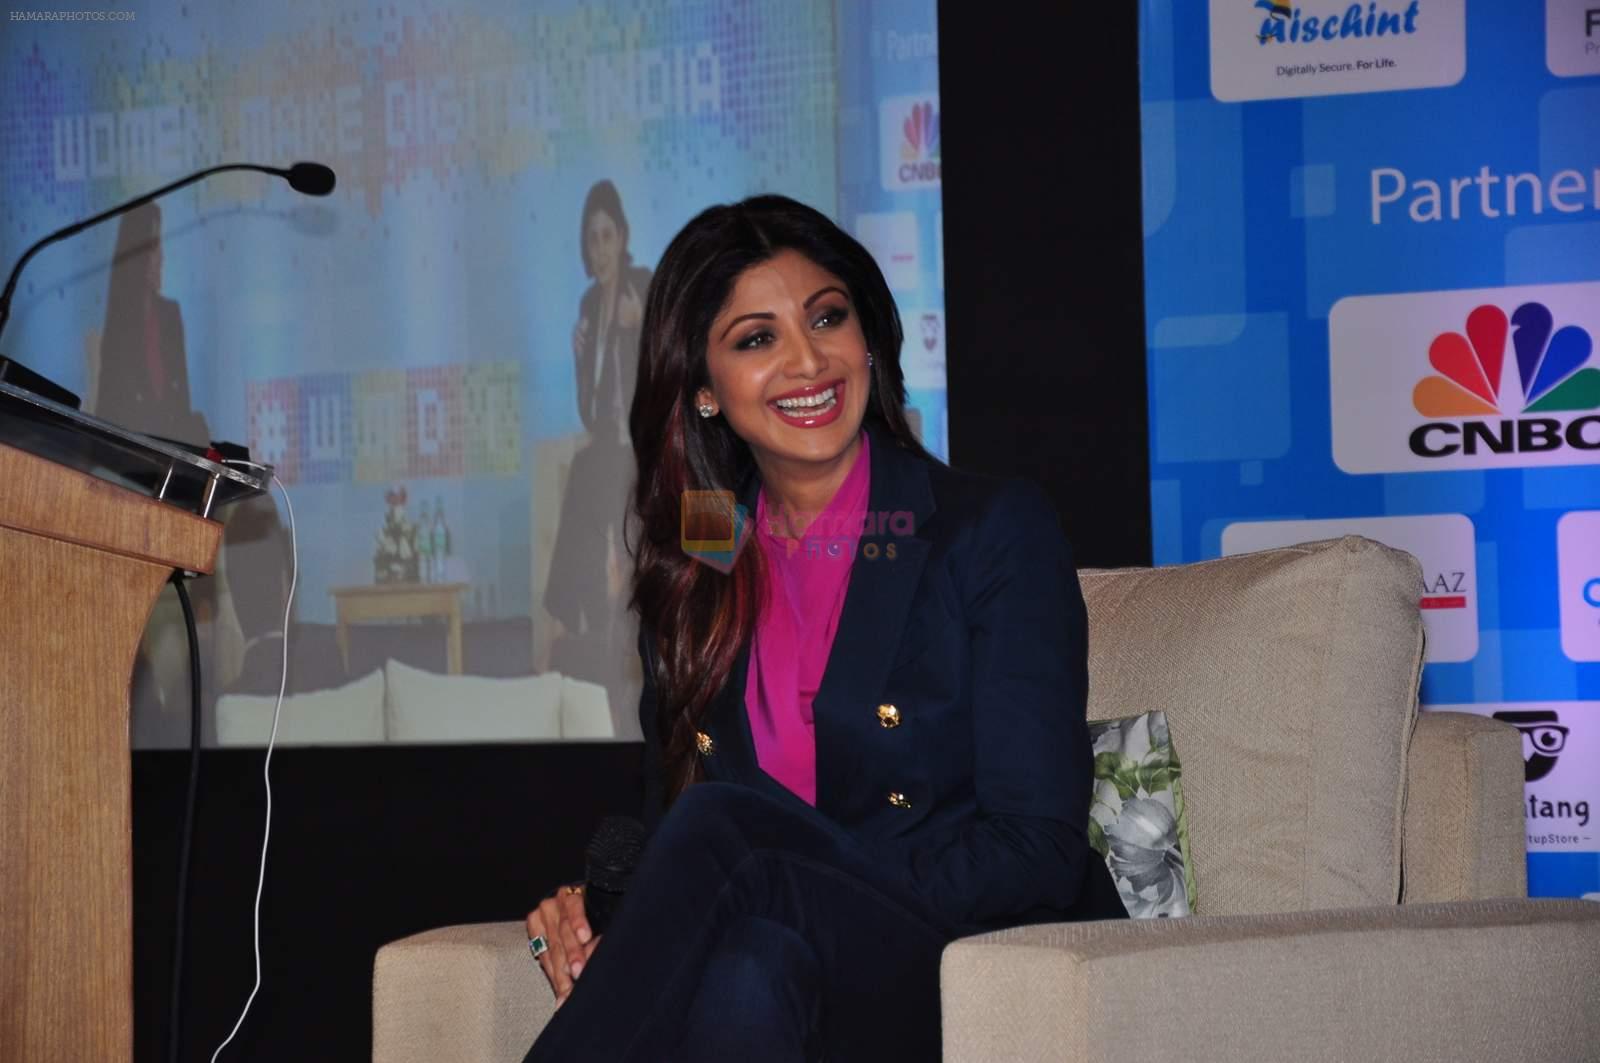 Shilpa Shetty at Heroes summit on 10th Dec 2015